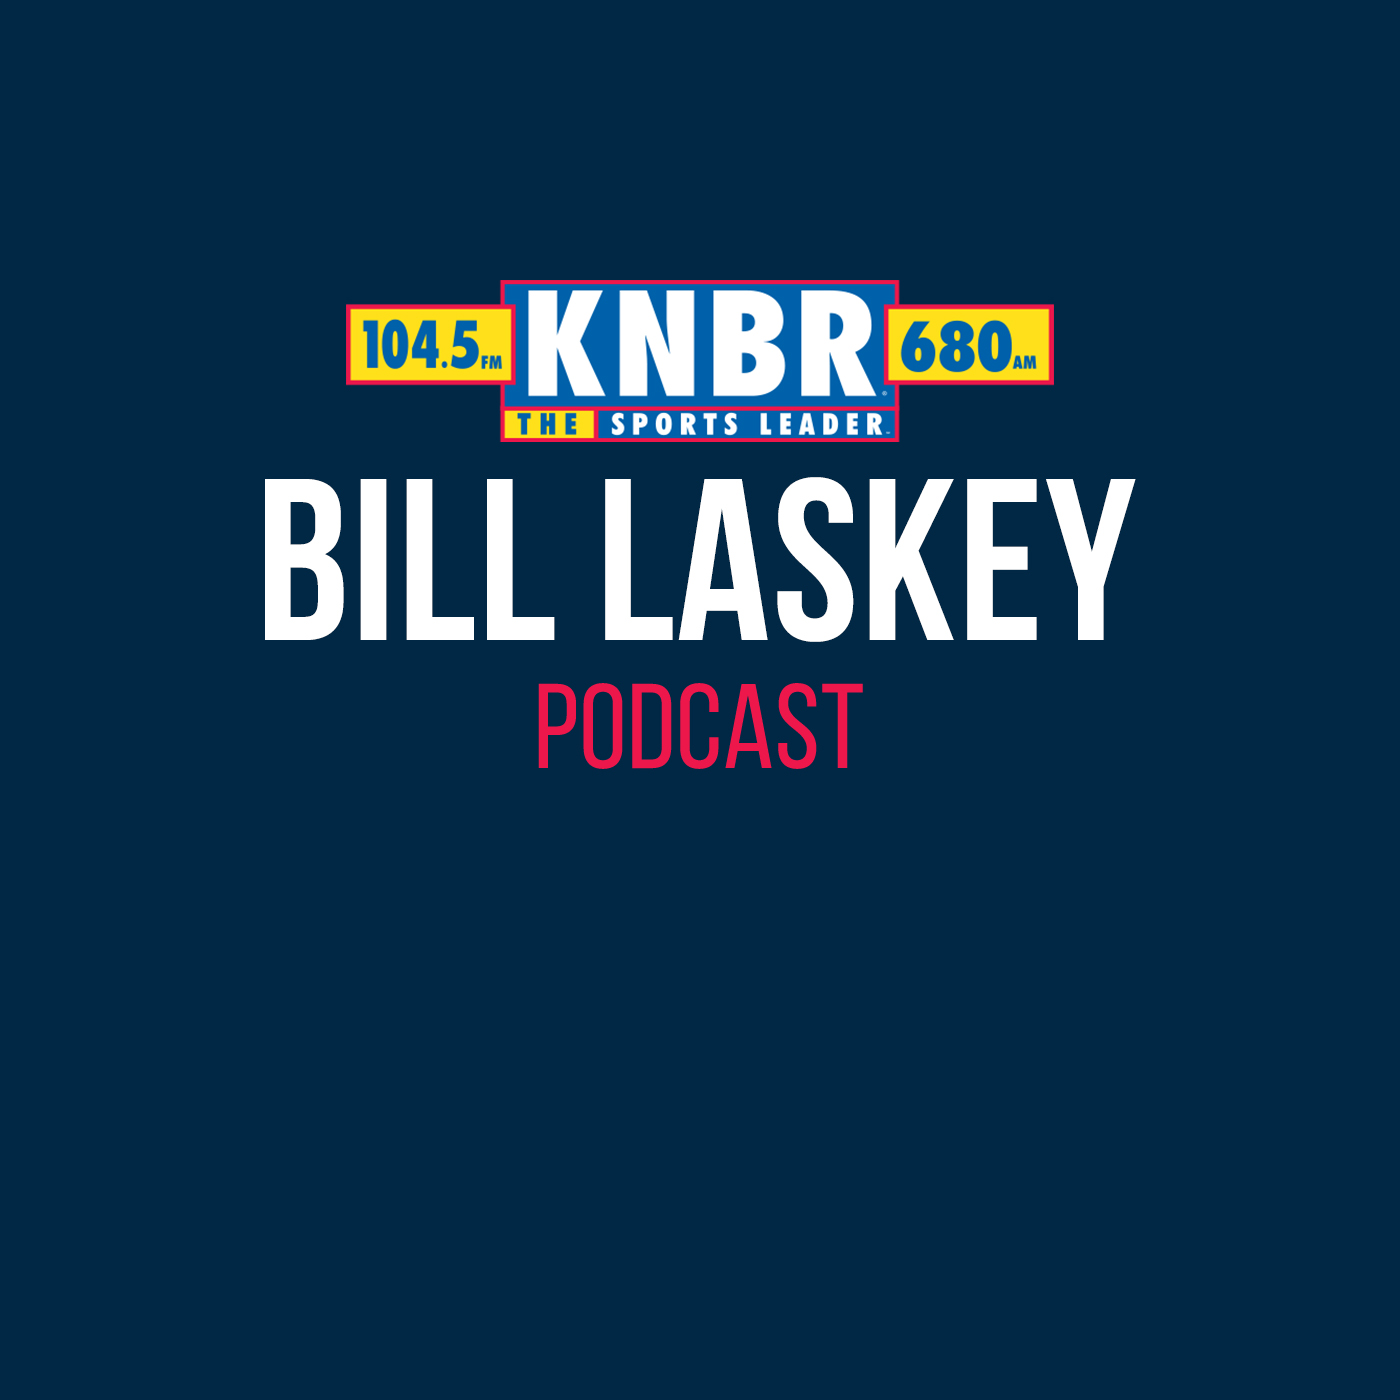 9-4 Steve Trout joins Extra Innings with Bill Laskey to discuss his baseball journey & to give his perspective on what it was like to play at Wrigley Field